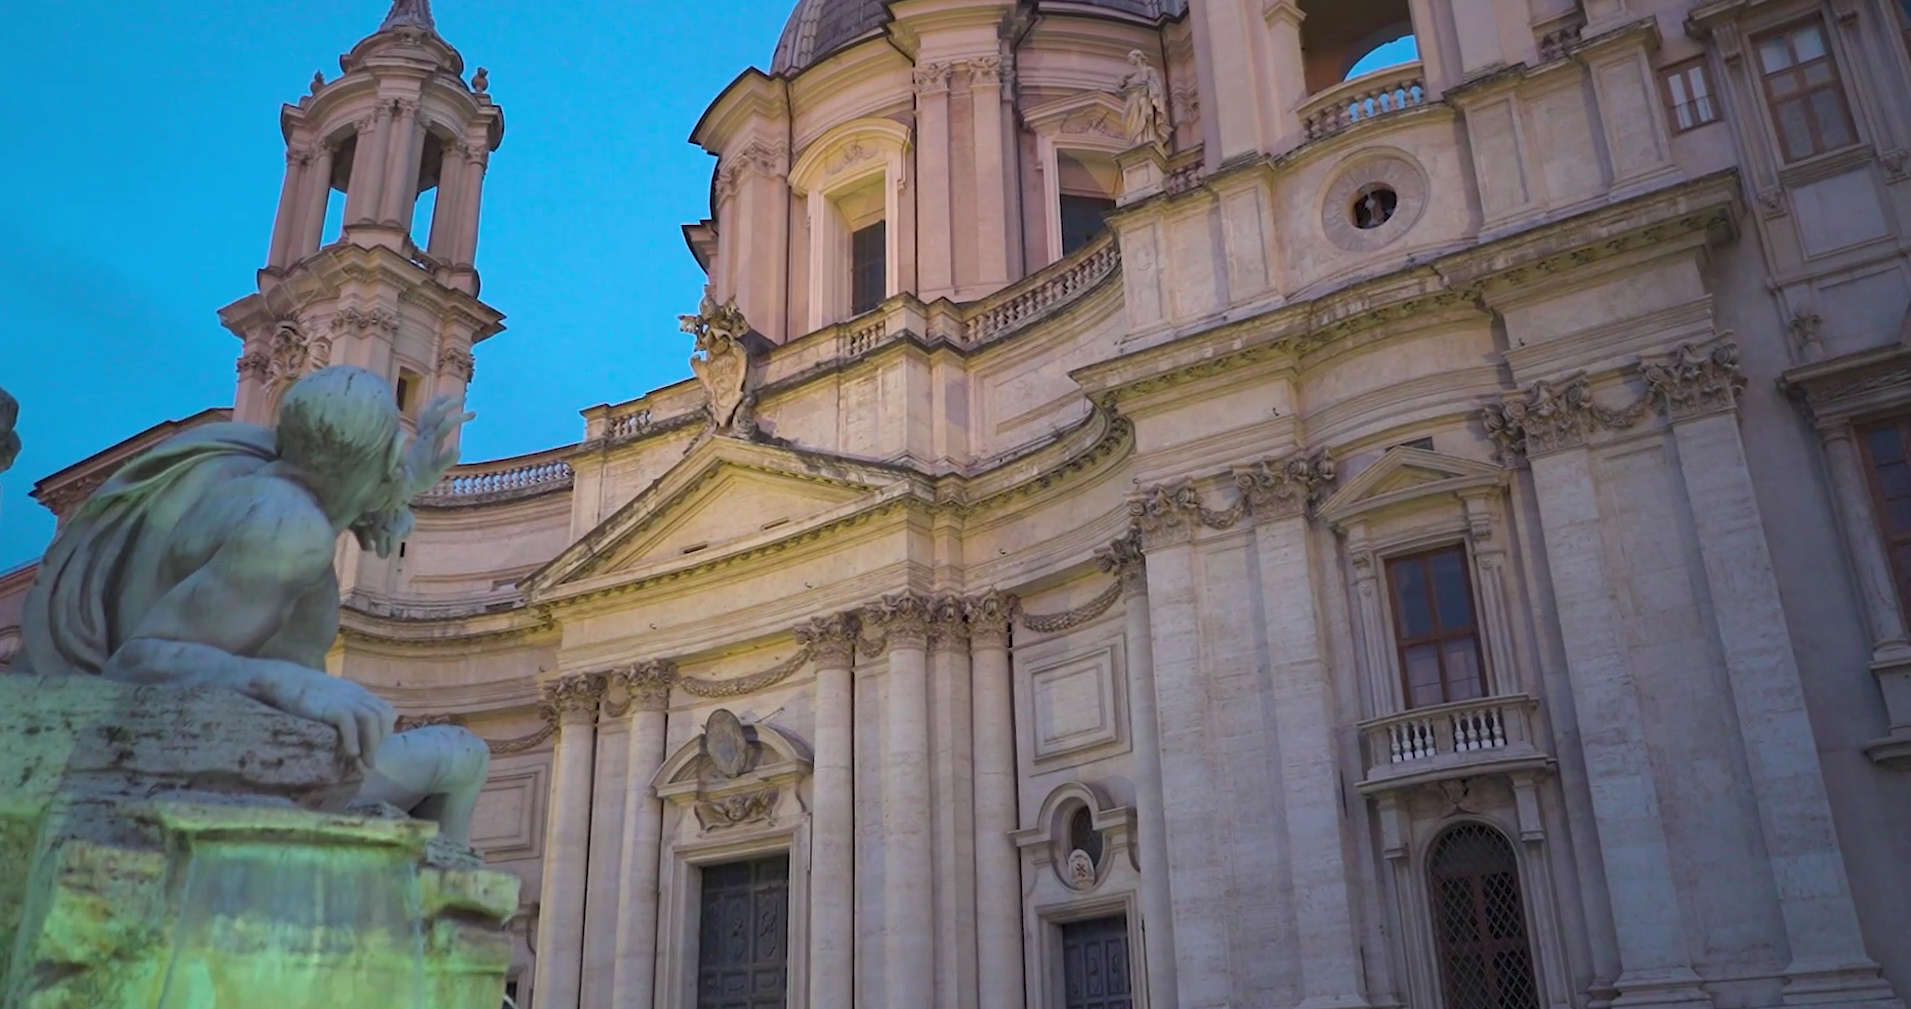 The facade of Sant'Agnese in Agone